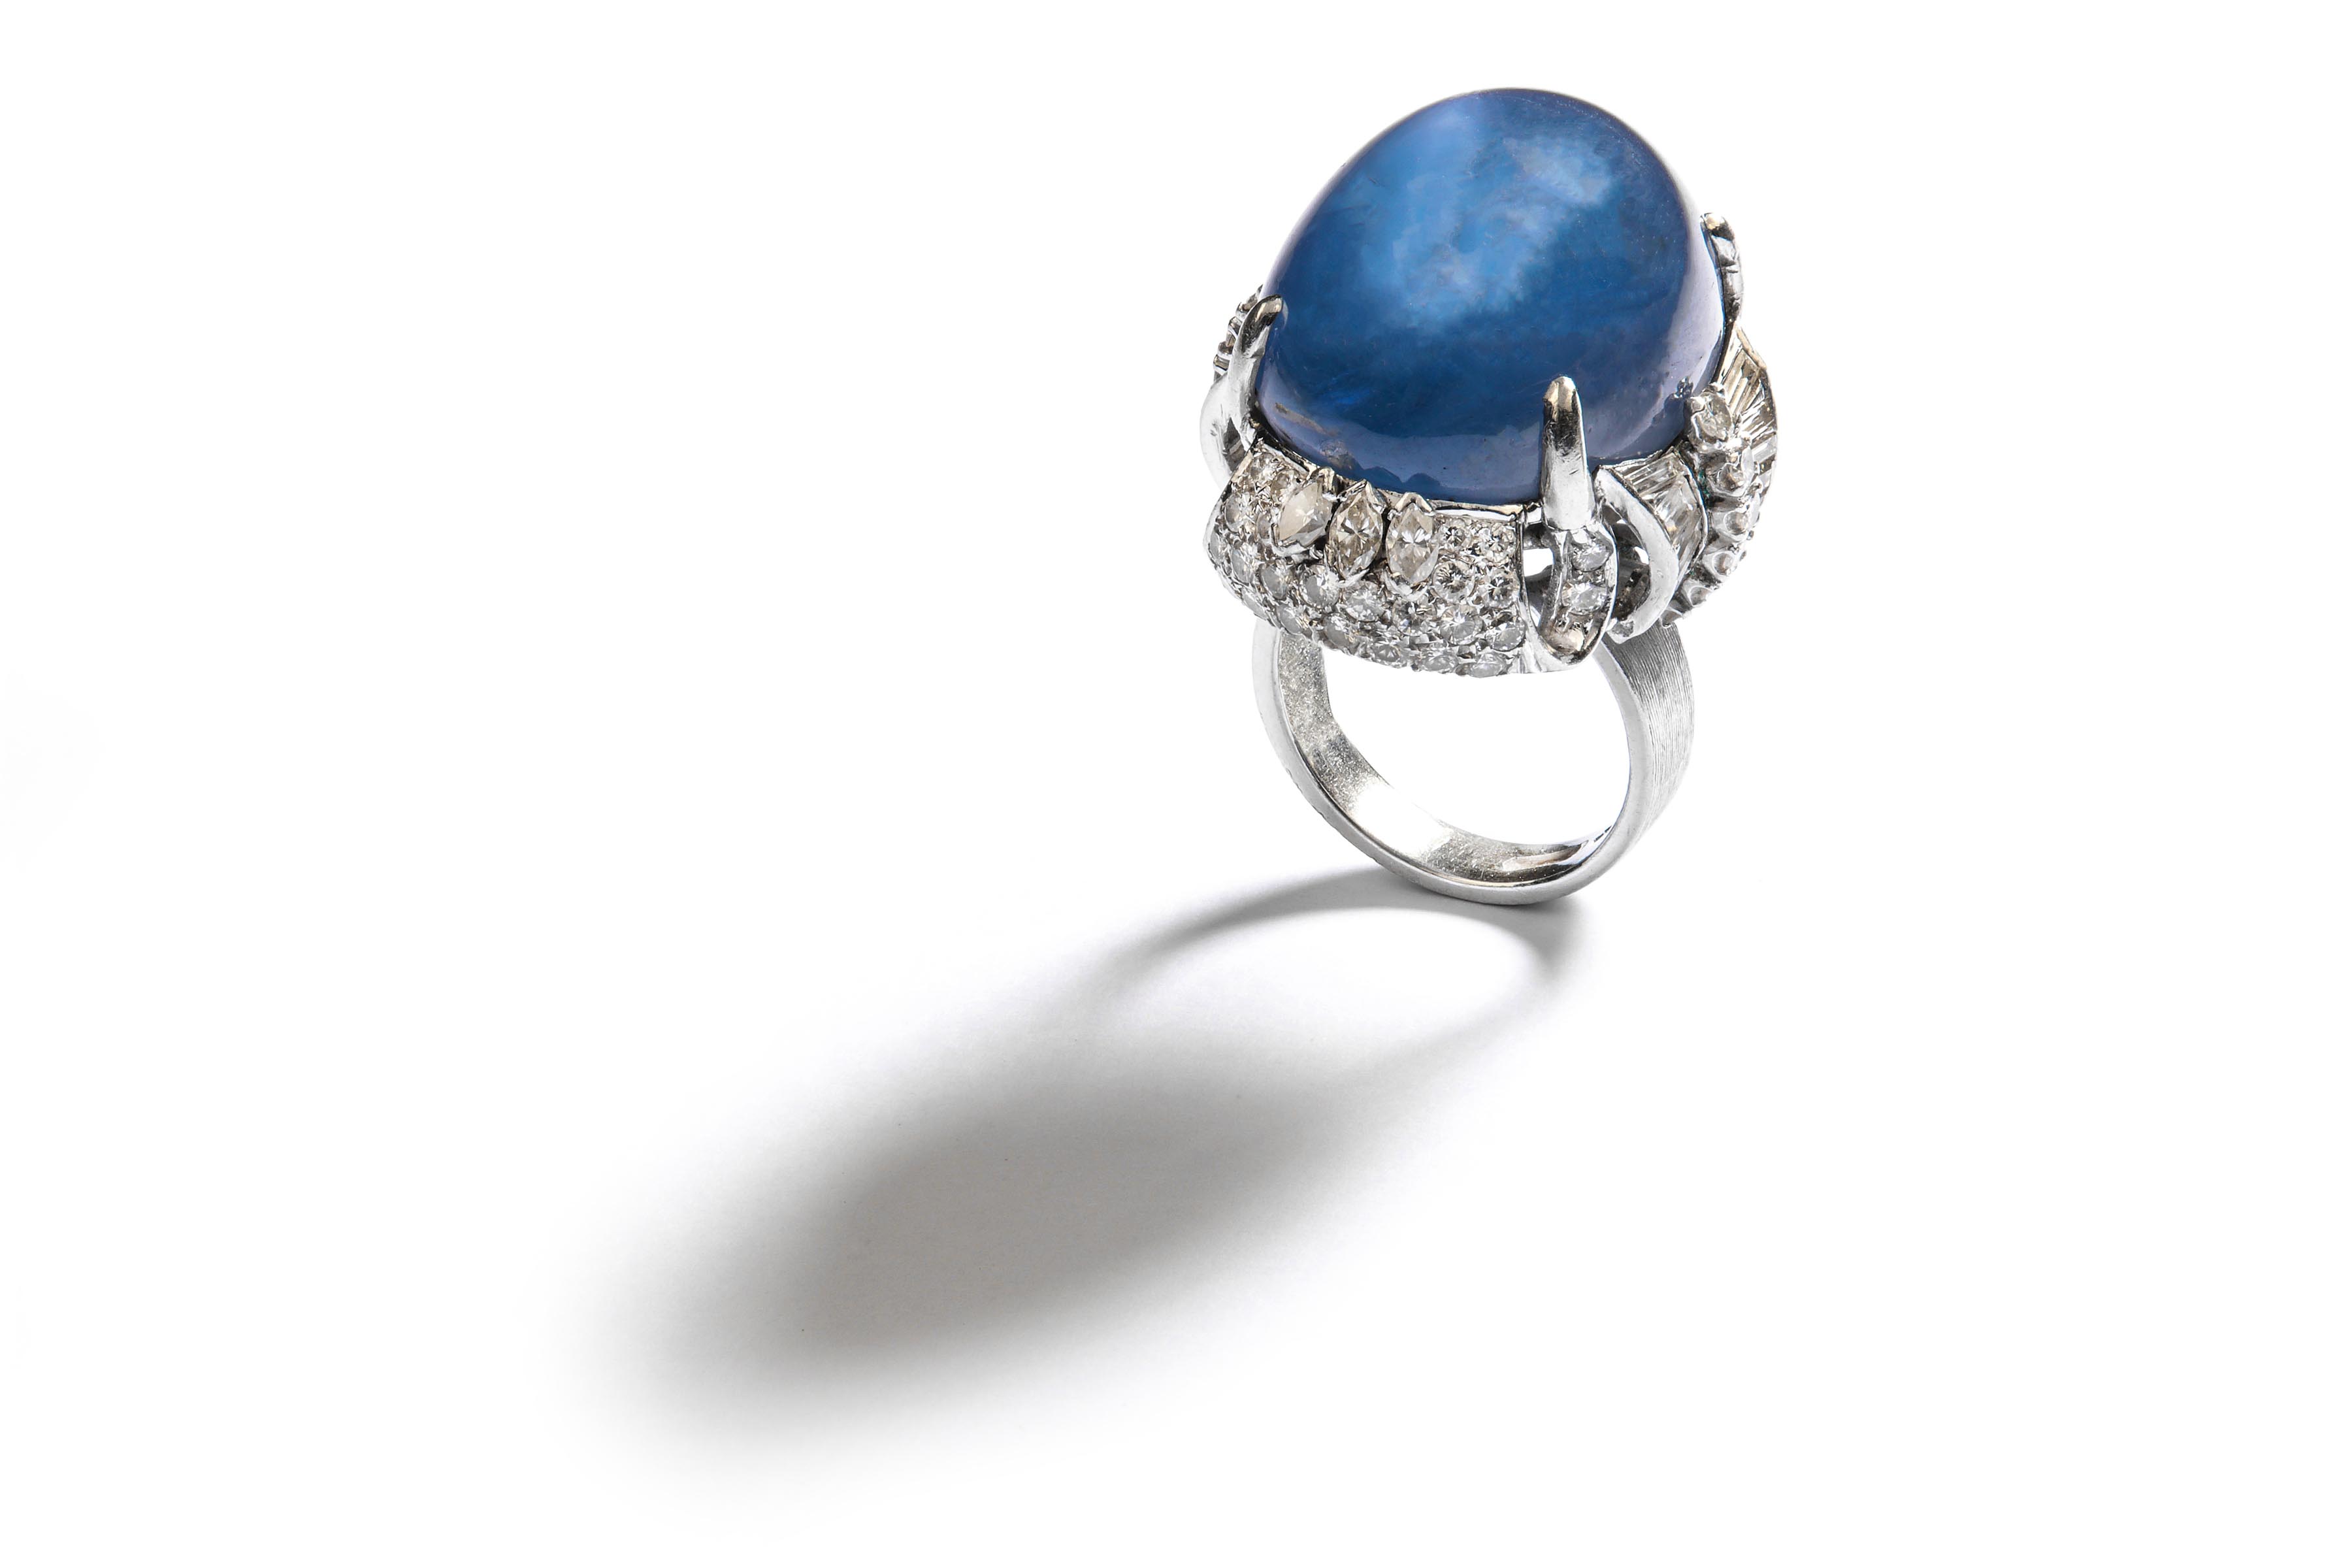 A star sapphire and diamond dress ring - Image 2 of 3